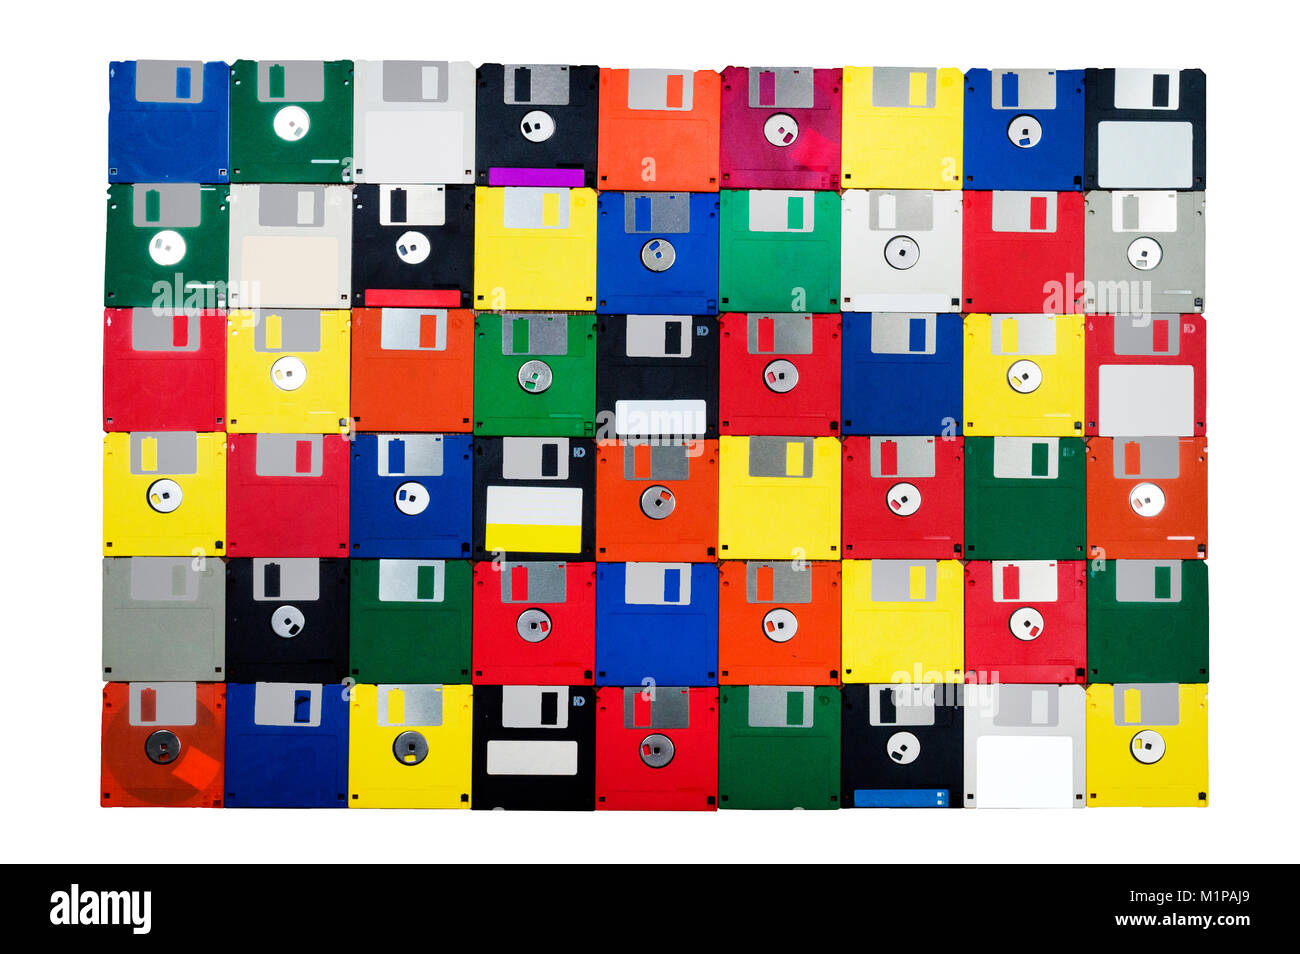 Horizontal shot of a group of multicolored plastic diskettes laid in a solid background with a white background.  Shows fronts and backs of disks. Stock Photo